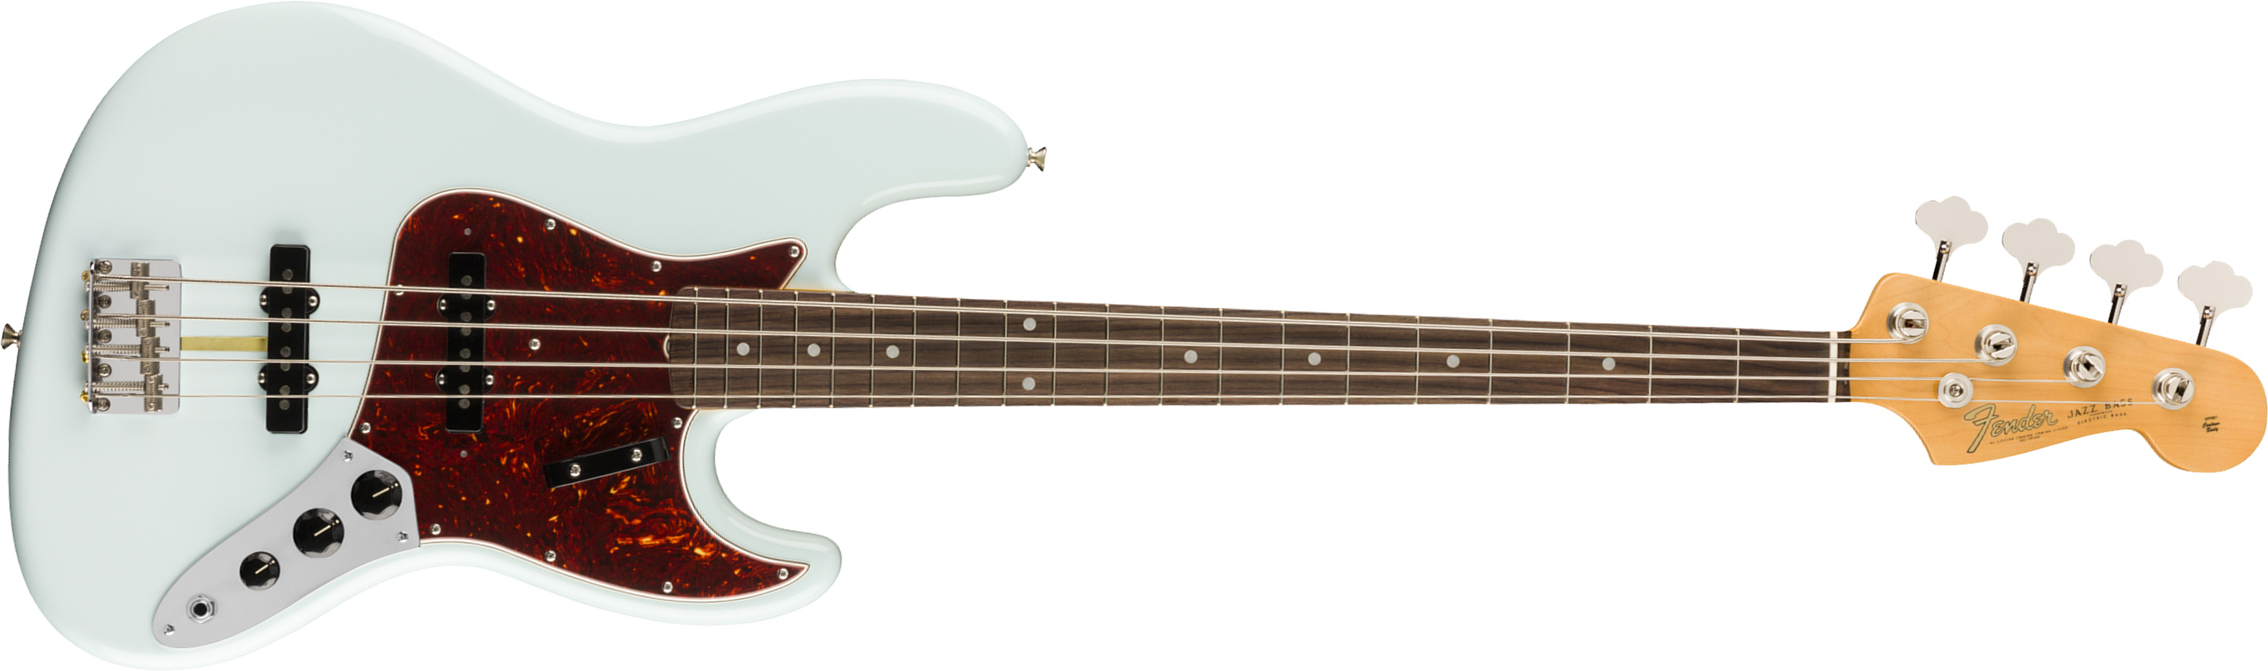 Fender Jazz Bass '60s American Original Usa Rw - Sonic Blue - Solid body electric bass - Main picture